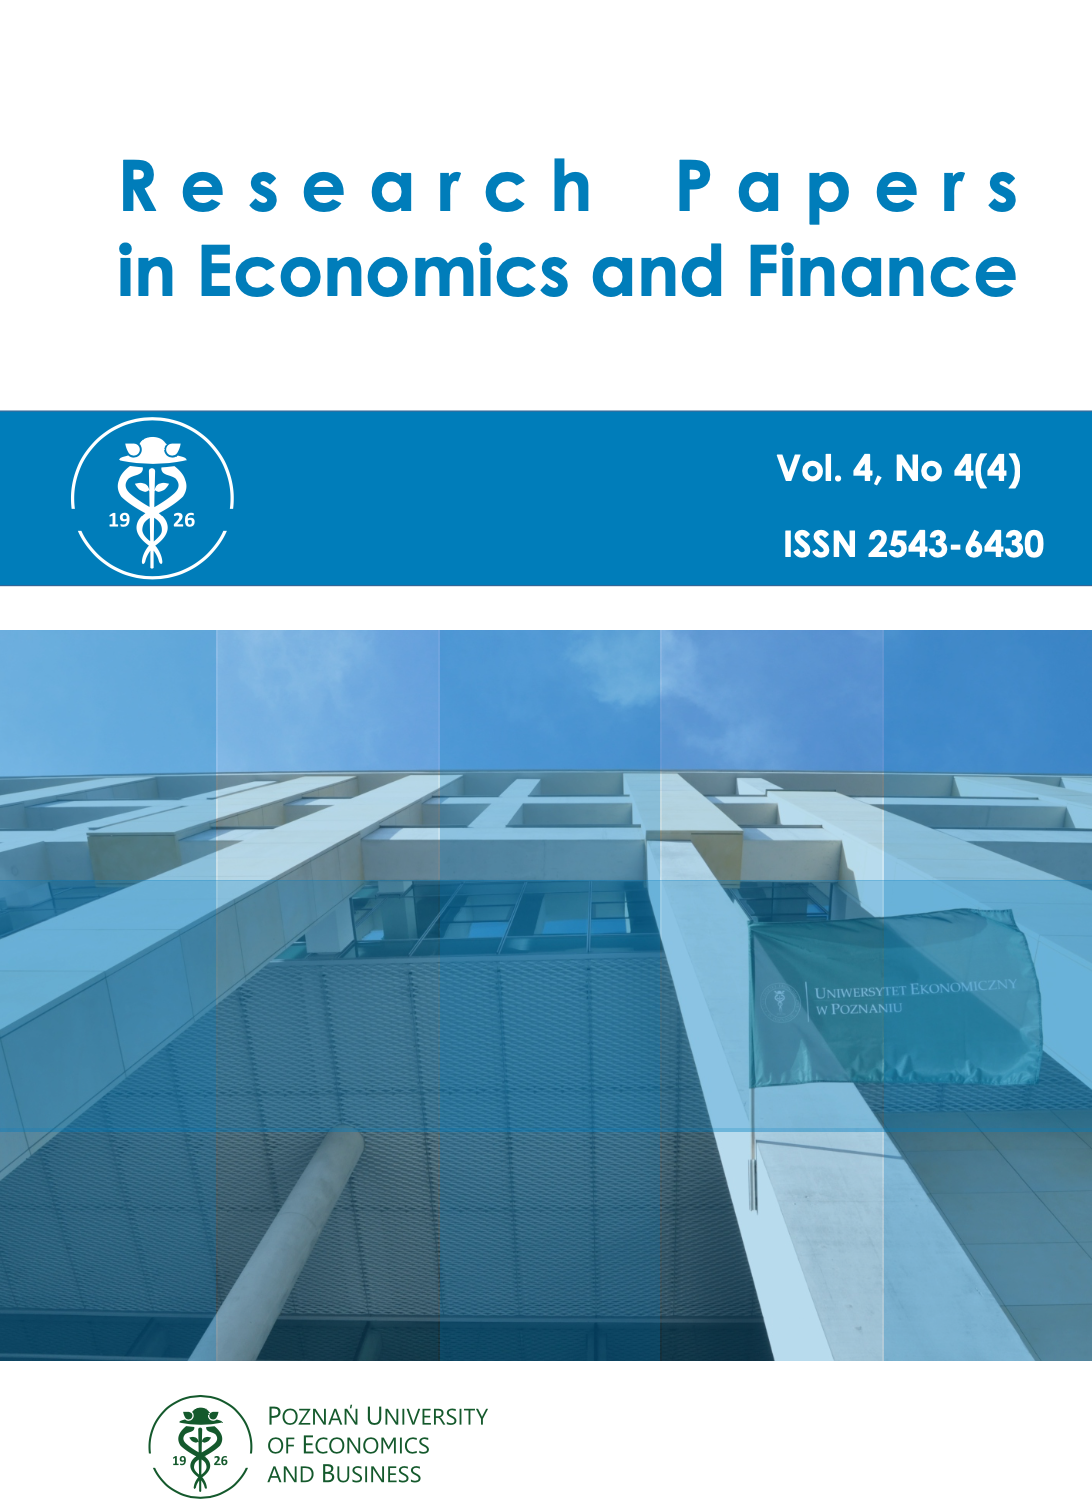 Innovative development of countries in the context of global economic imbalances